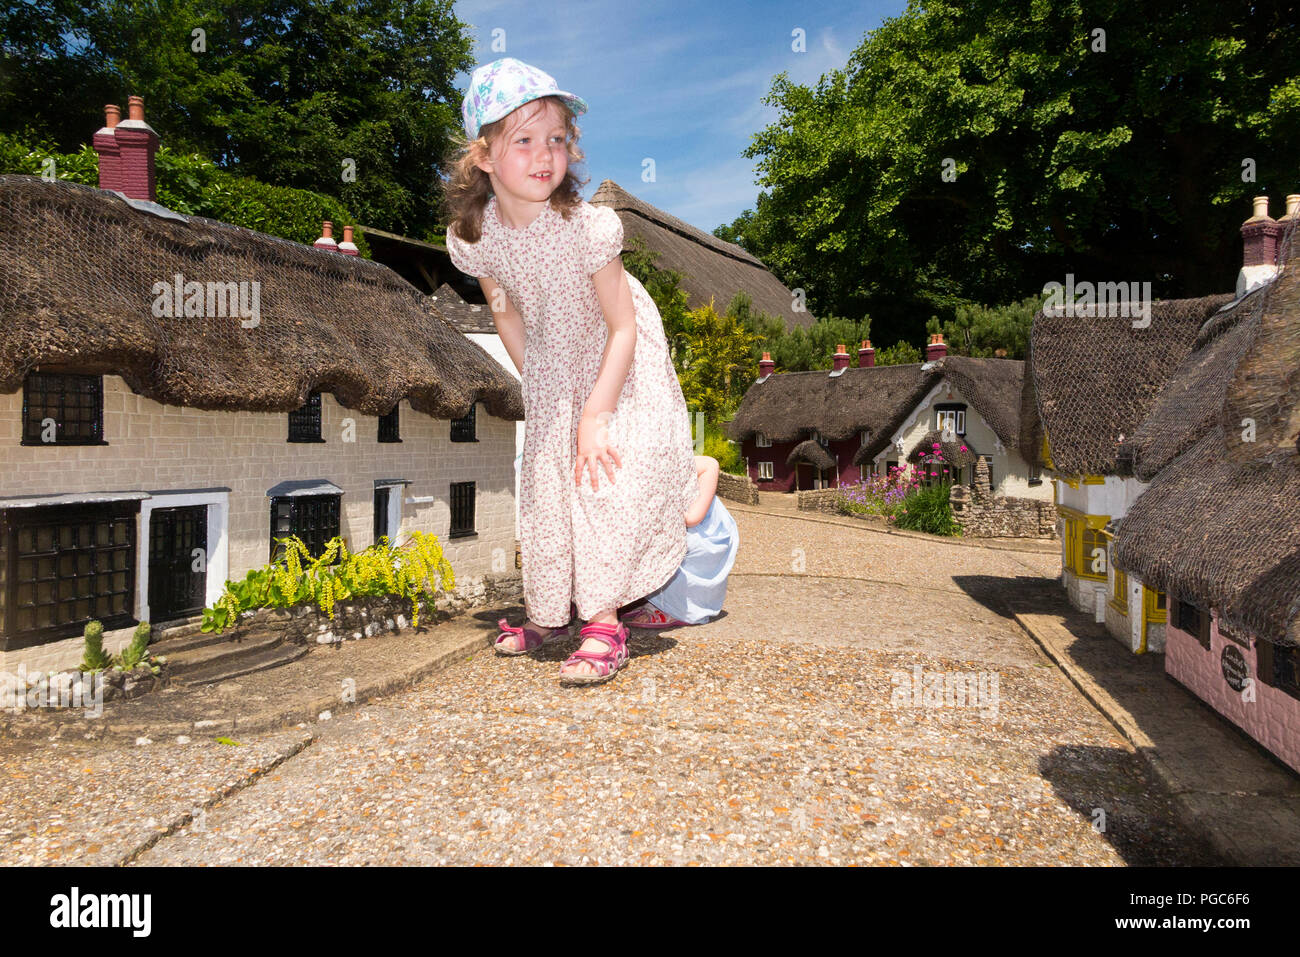 Girl / girls / child / children / kid / kids explore the Model Village at Godshill on the Isle of Wight, on a sunny day with blue sky / skies. UK (101 Stock Photo